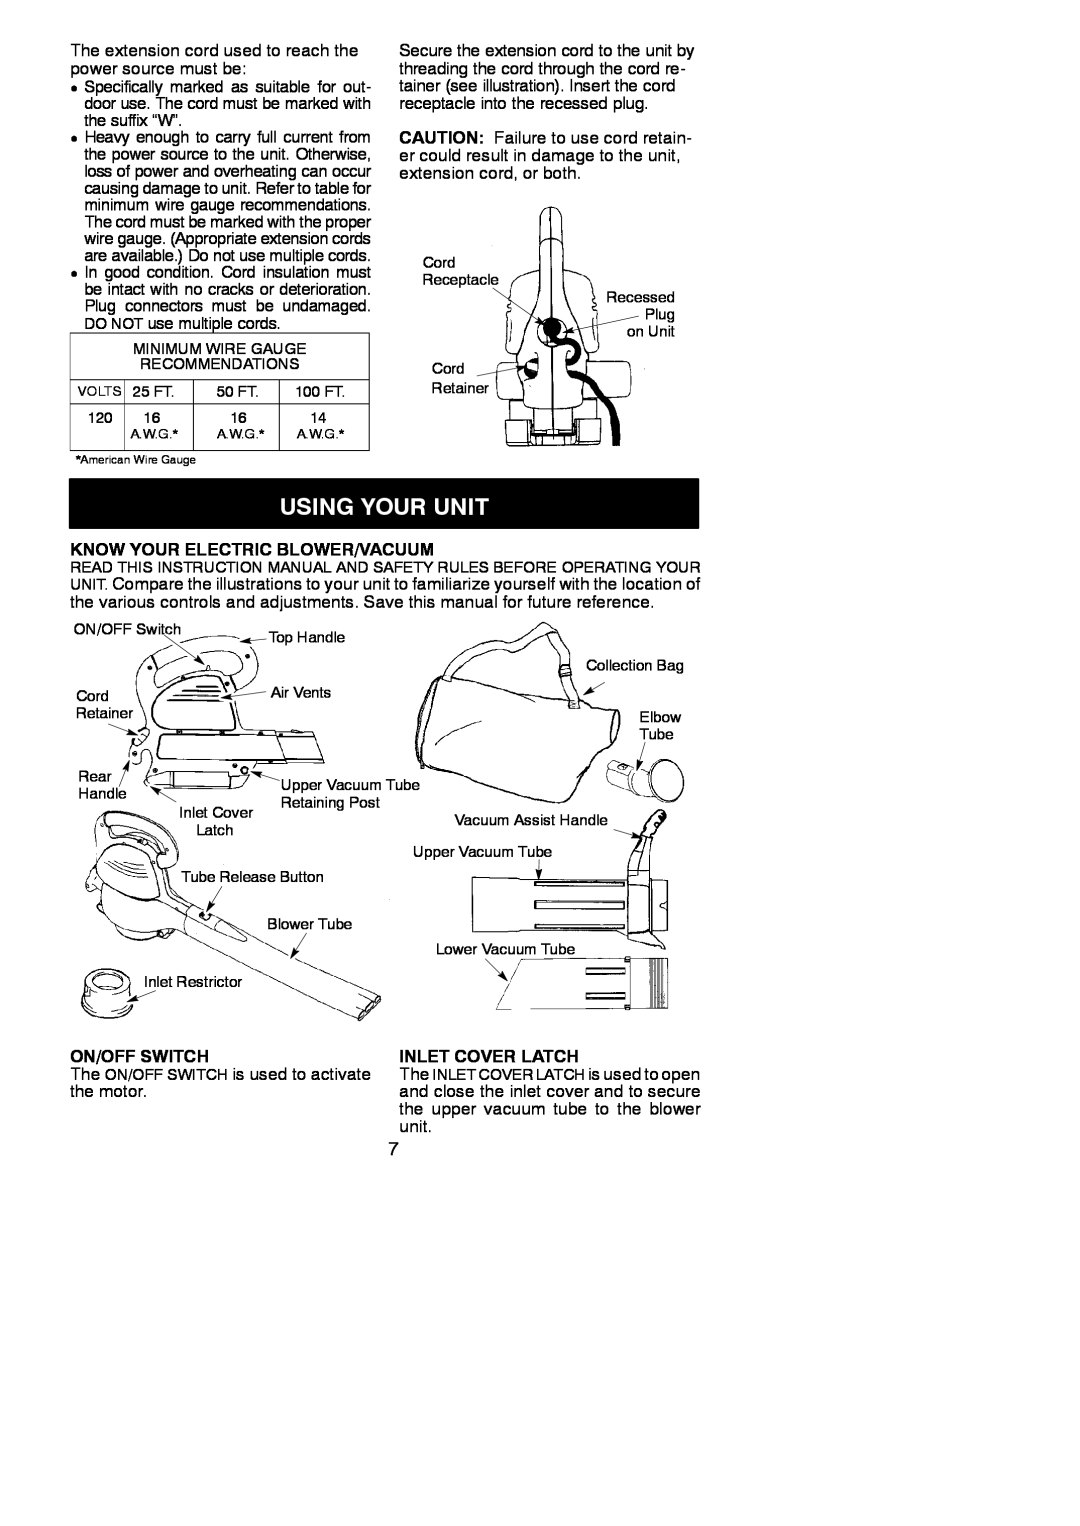 Weed Eater 952711474 instruction manual Using Your Unit, Know Your Electric Blower/Vacuum, On/Off Switch, Inlet Cover Latch 